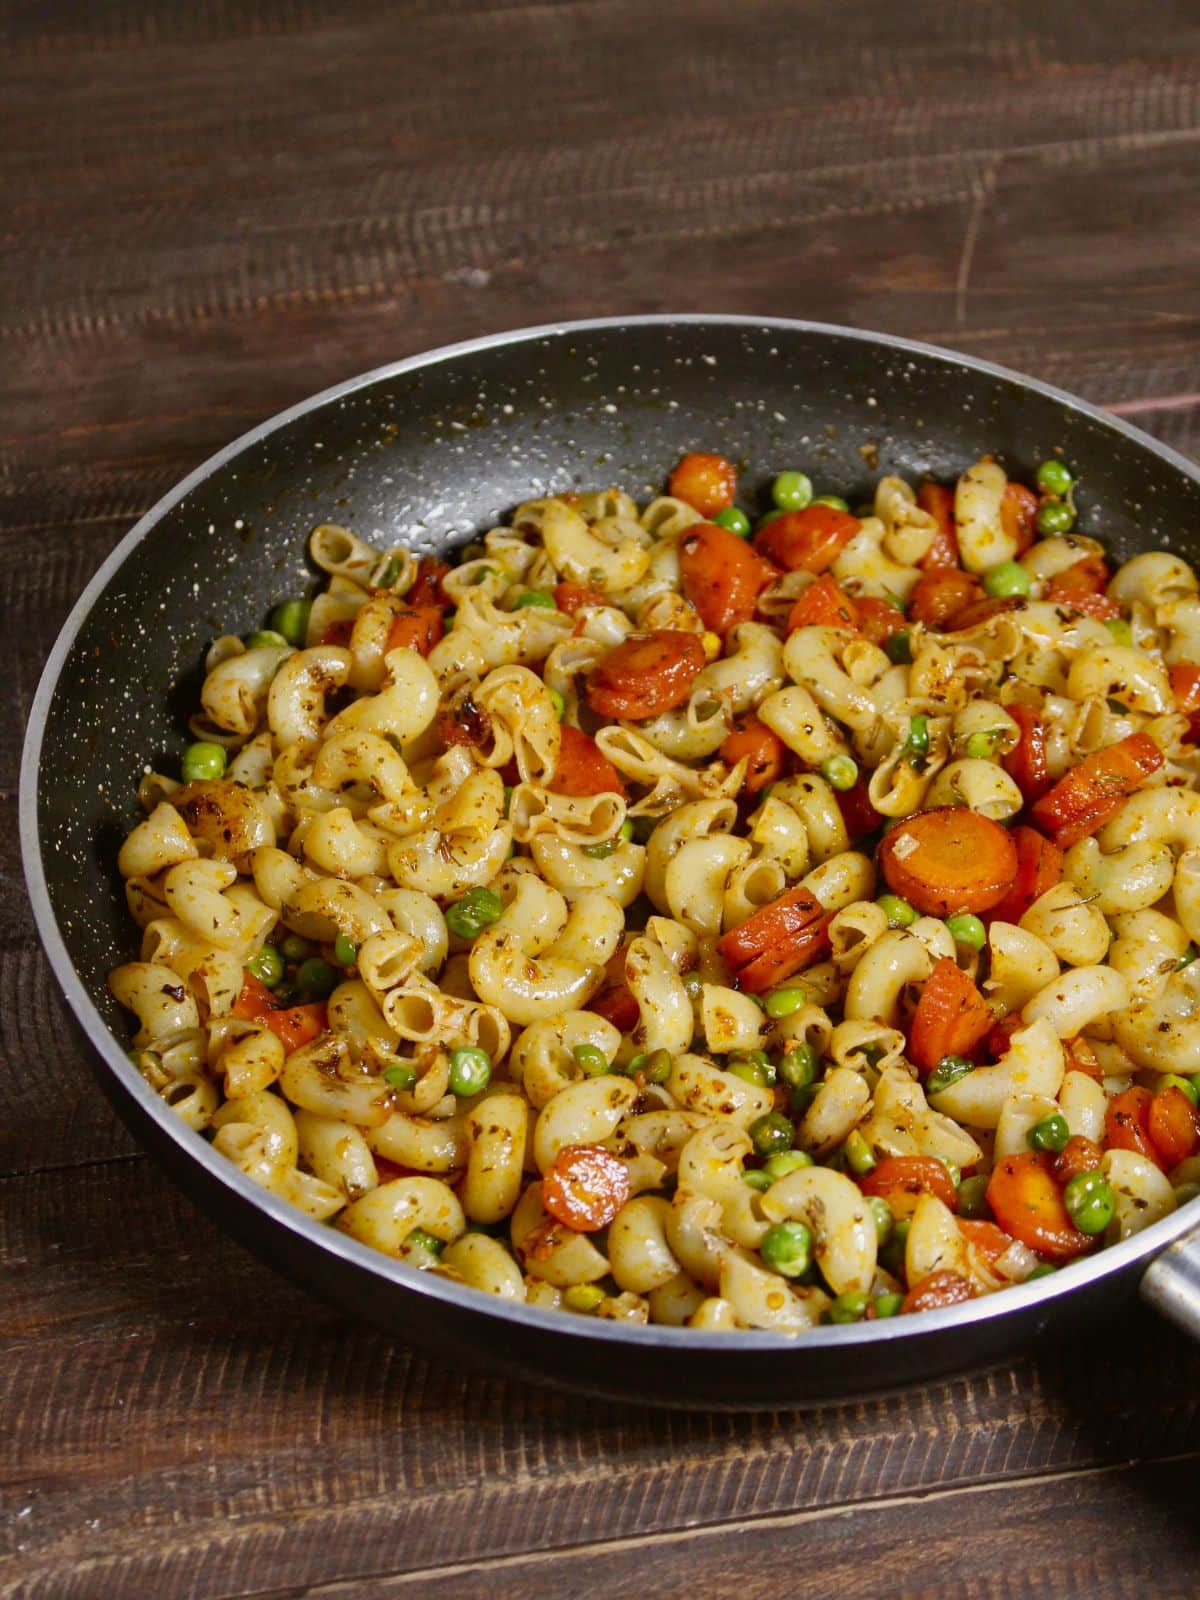 cook and mix well everything and your carrot and peas macaroni ready to enjoy 